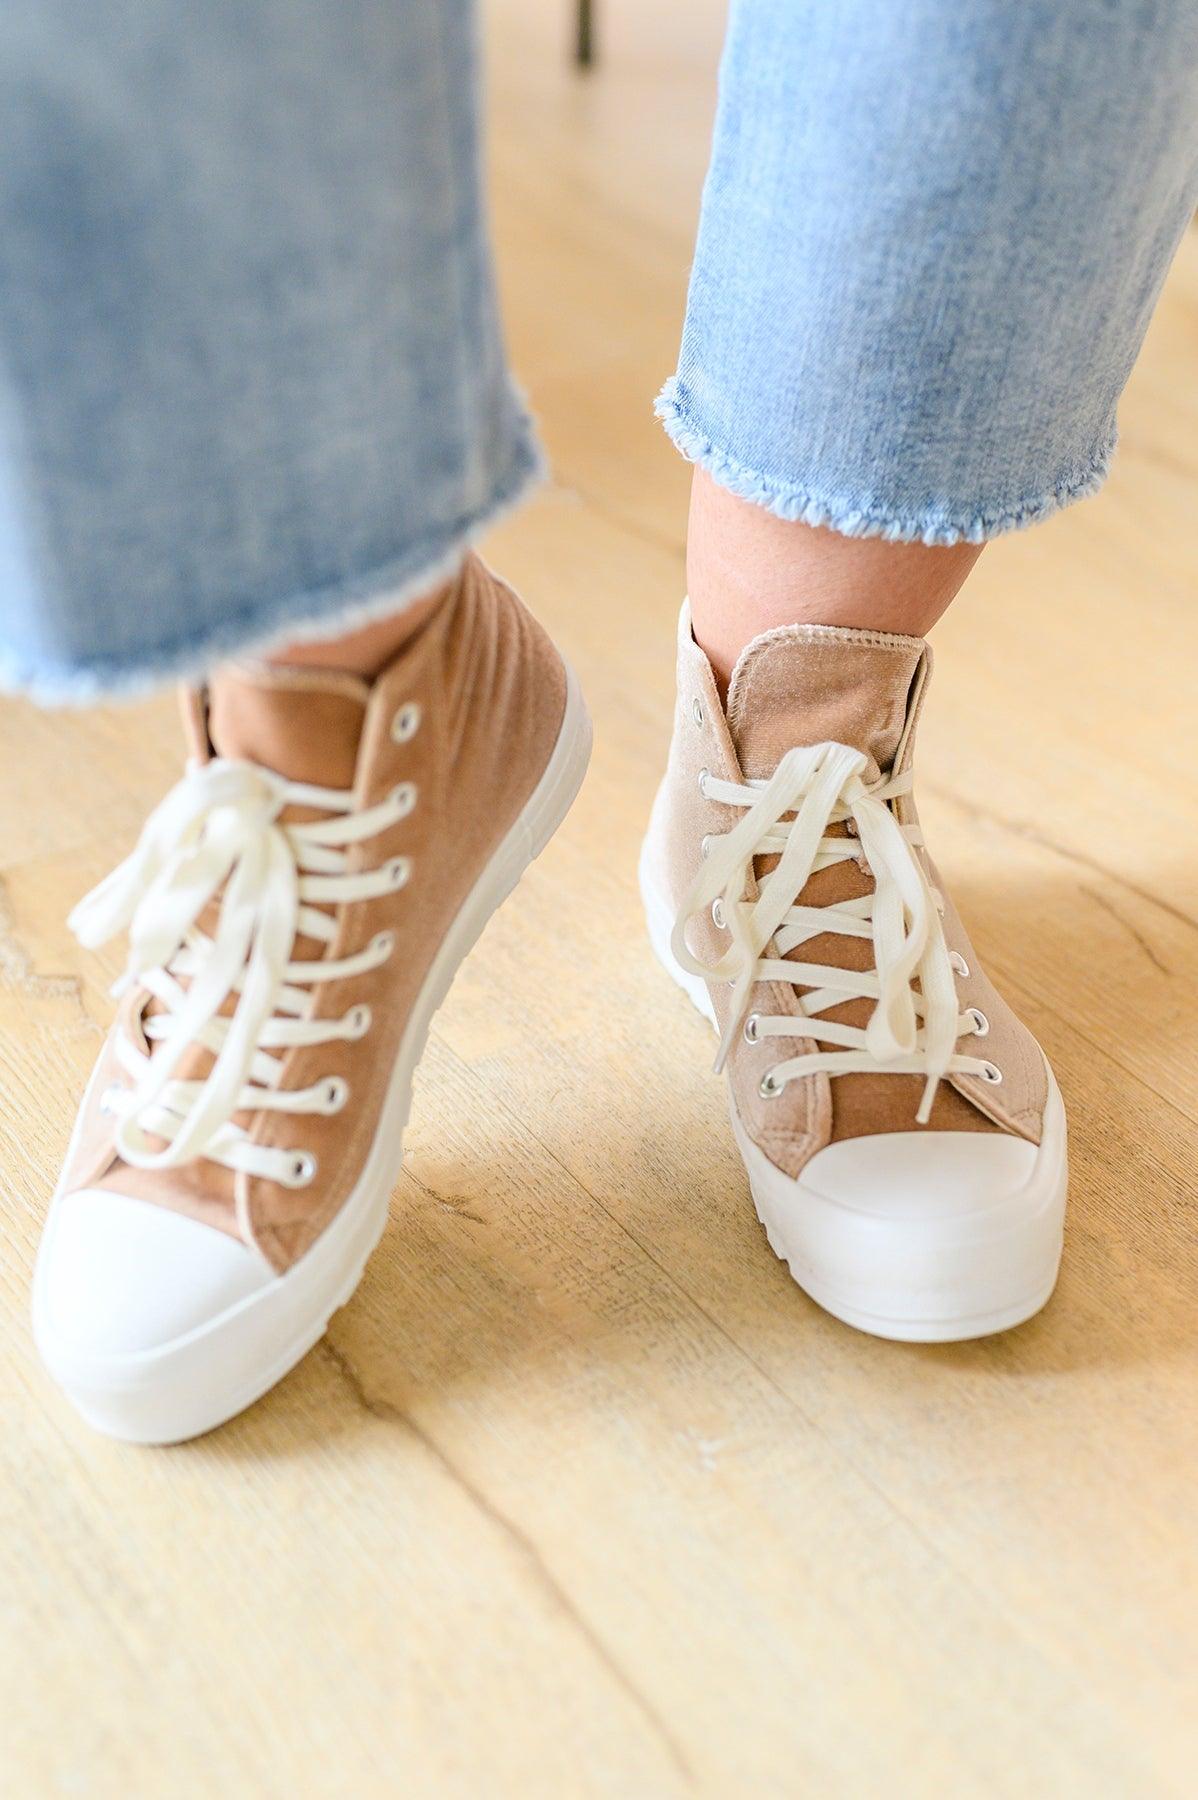 Run Me Down Velvet High Tops in Tan - Happily Ever Atchison Shop Co.